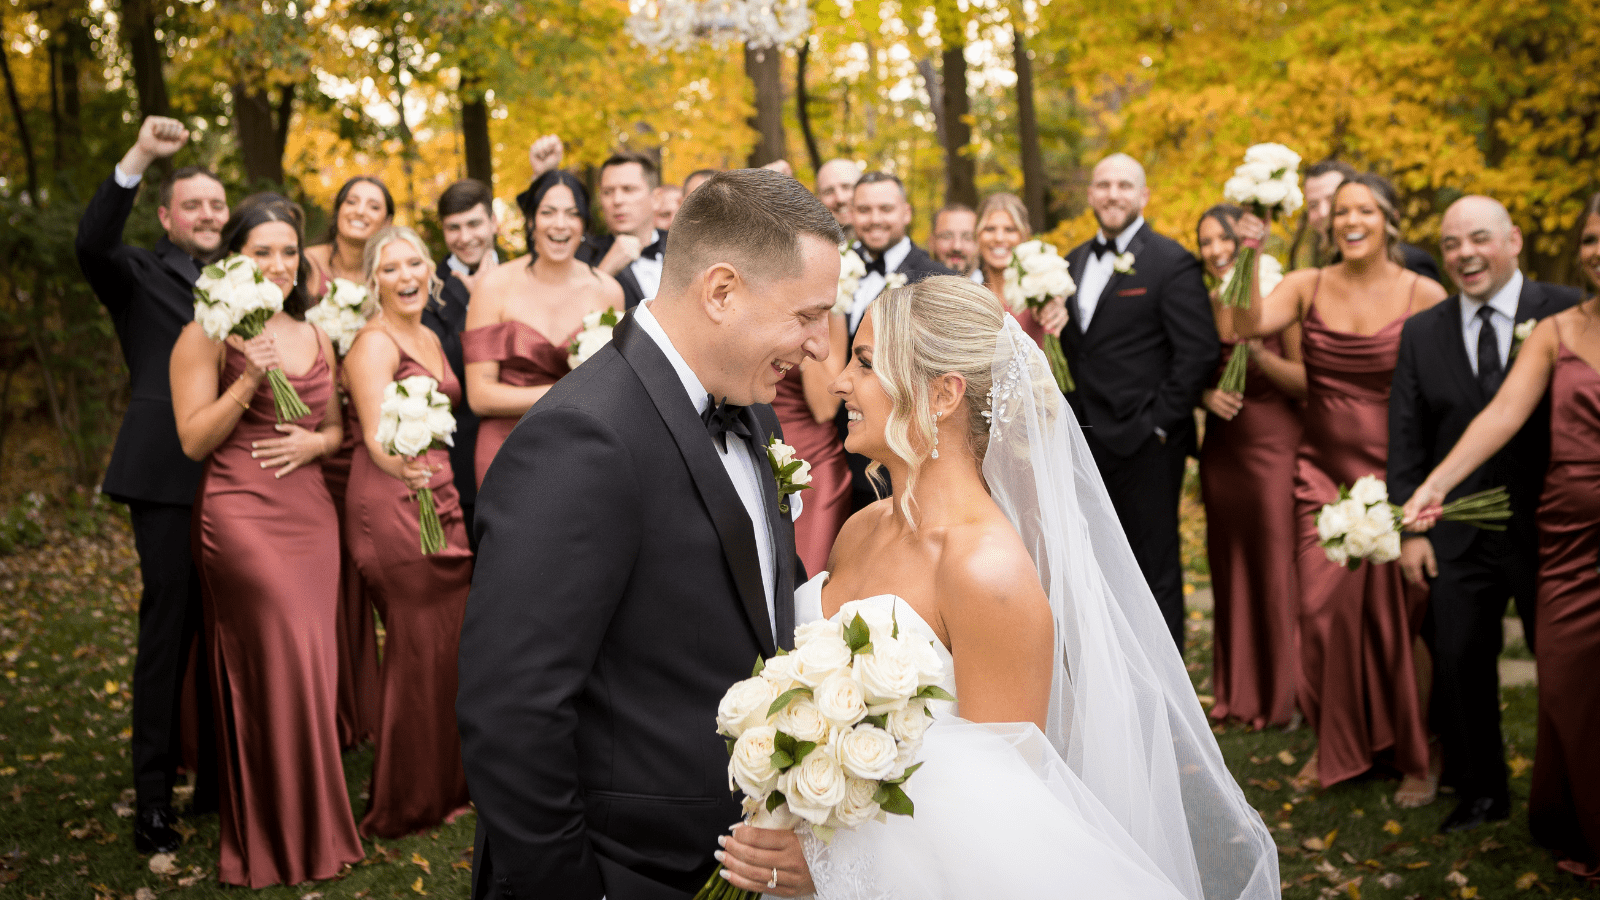 Celebrate Your Fall Wedding at Crystal Plaza